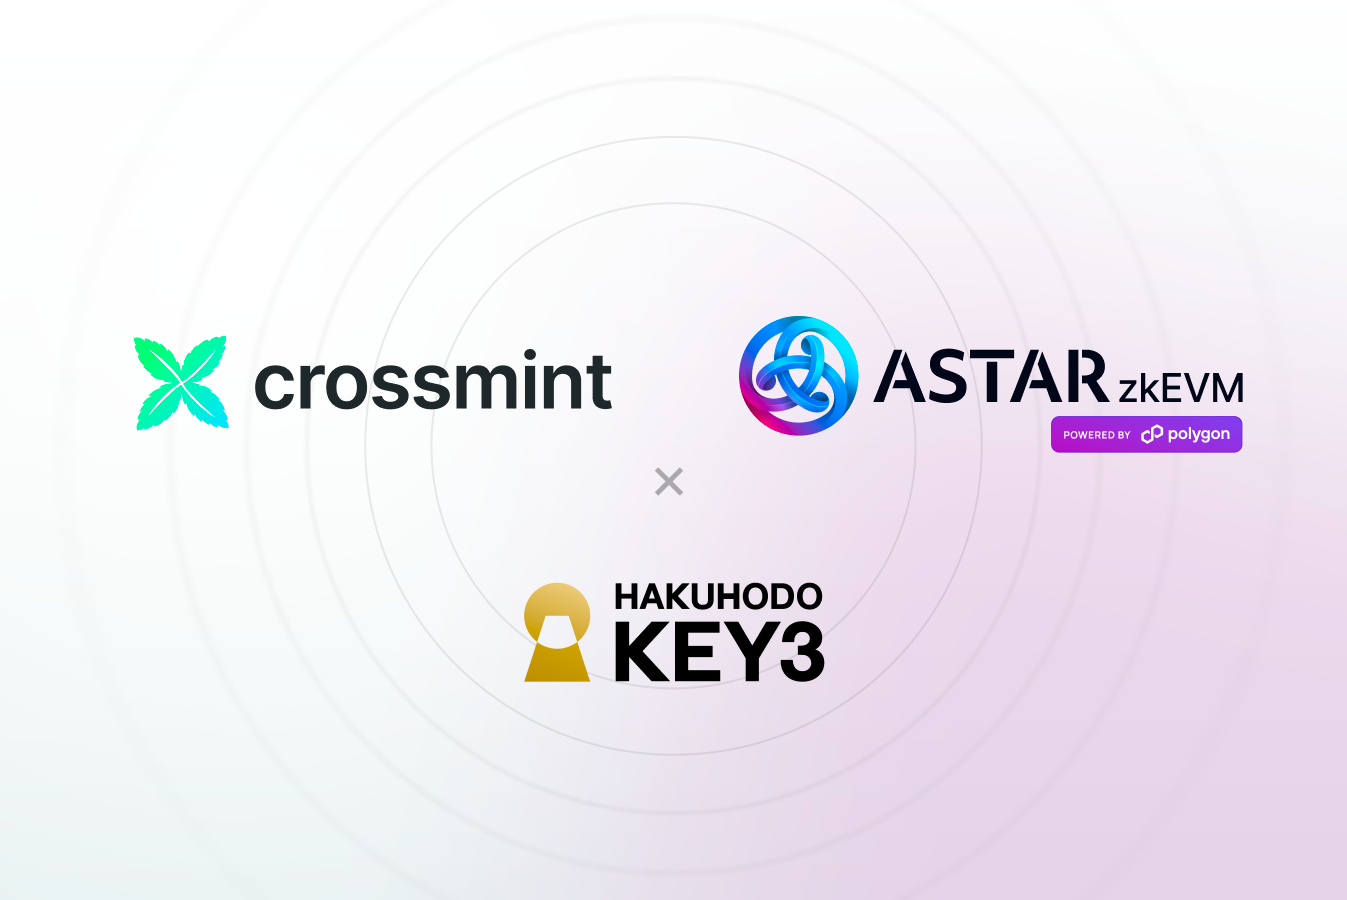 Crossmint, Astar, and Hakuhodo Team Up to Boost Web3 in Japan